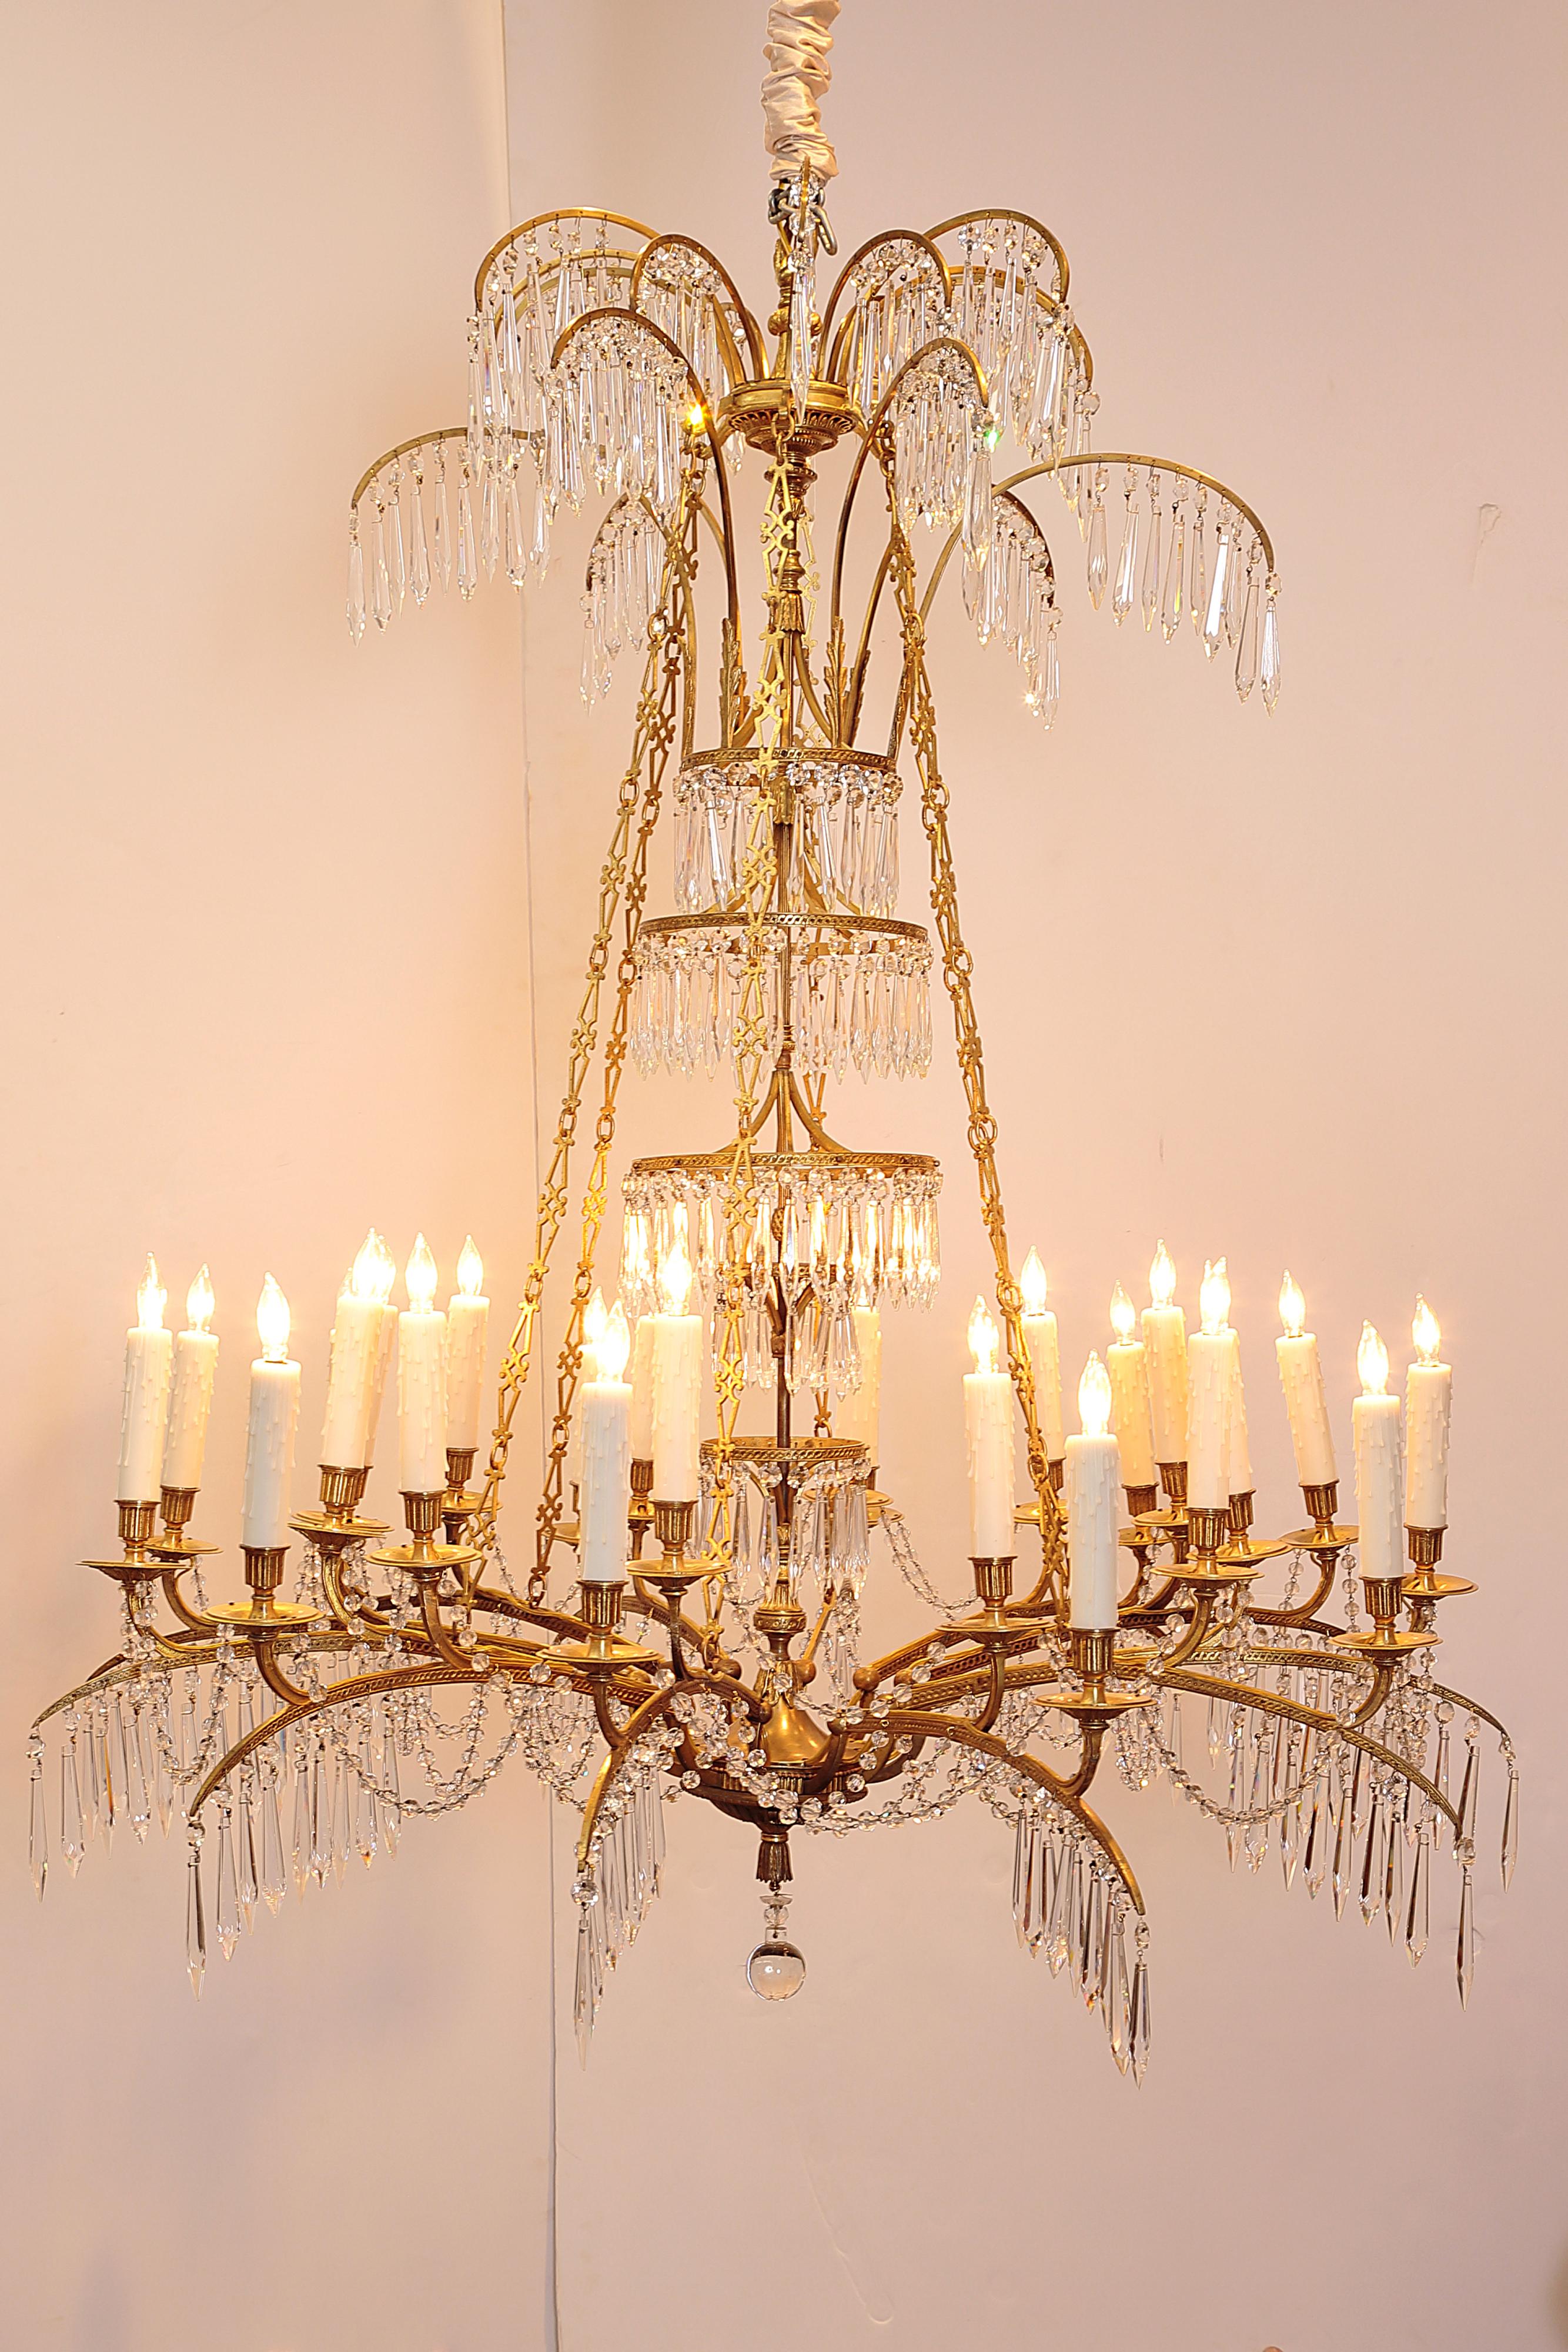 A German neoclassic ormolu and cut-glass twenty-four light chandelier, circa 1795, probably Berlin and attributable to Werner & Mieth, founded 1792, one of the great artistic foundries of the age of European Neoclassicism. 

drilled for electricity,